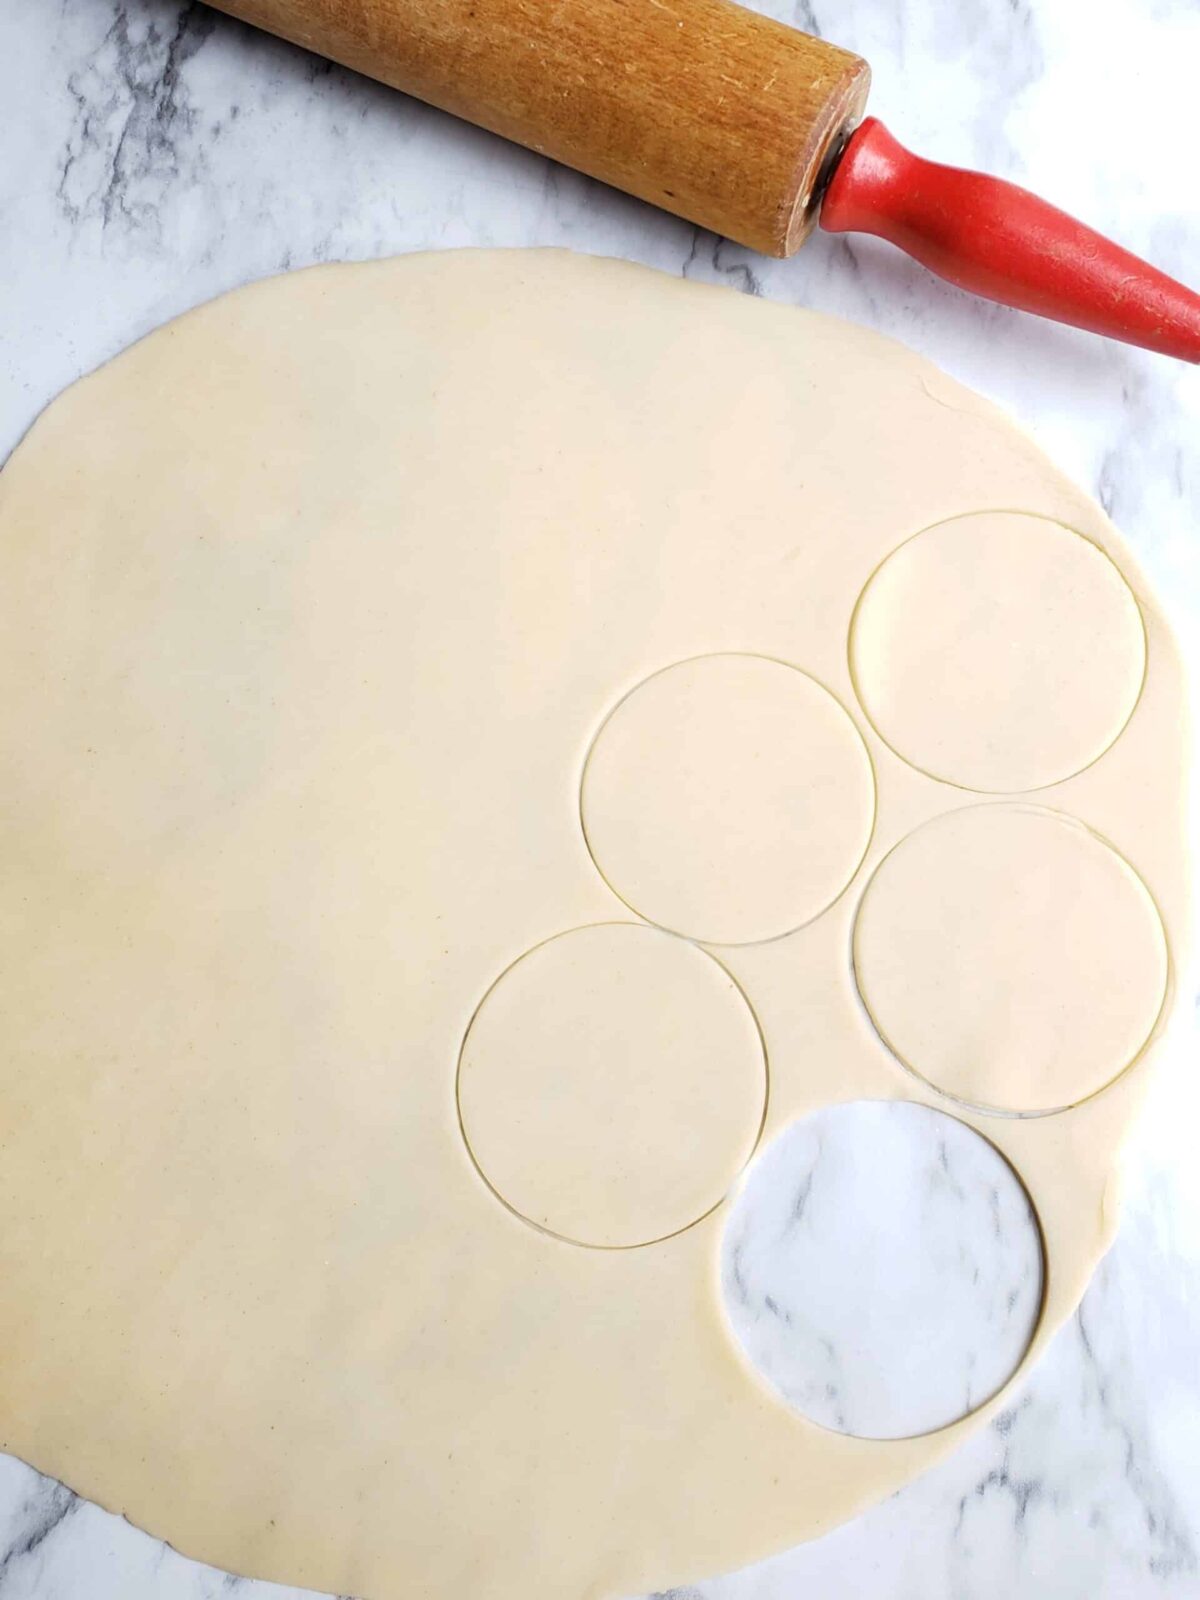 Cut pie dough into rounds with a rolling pin